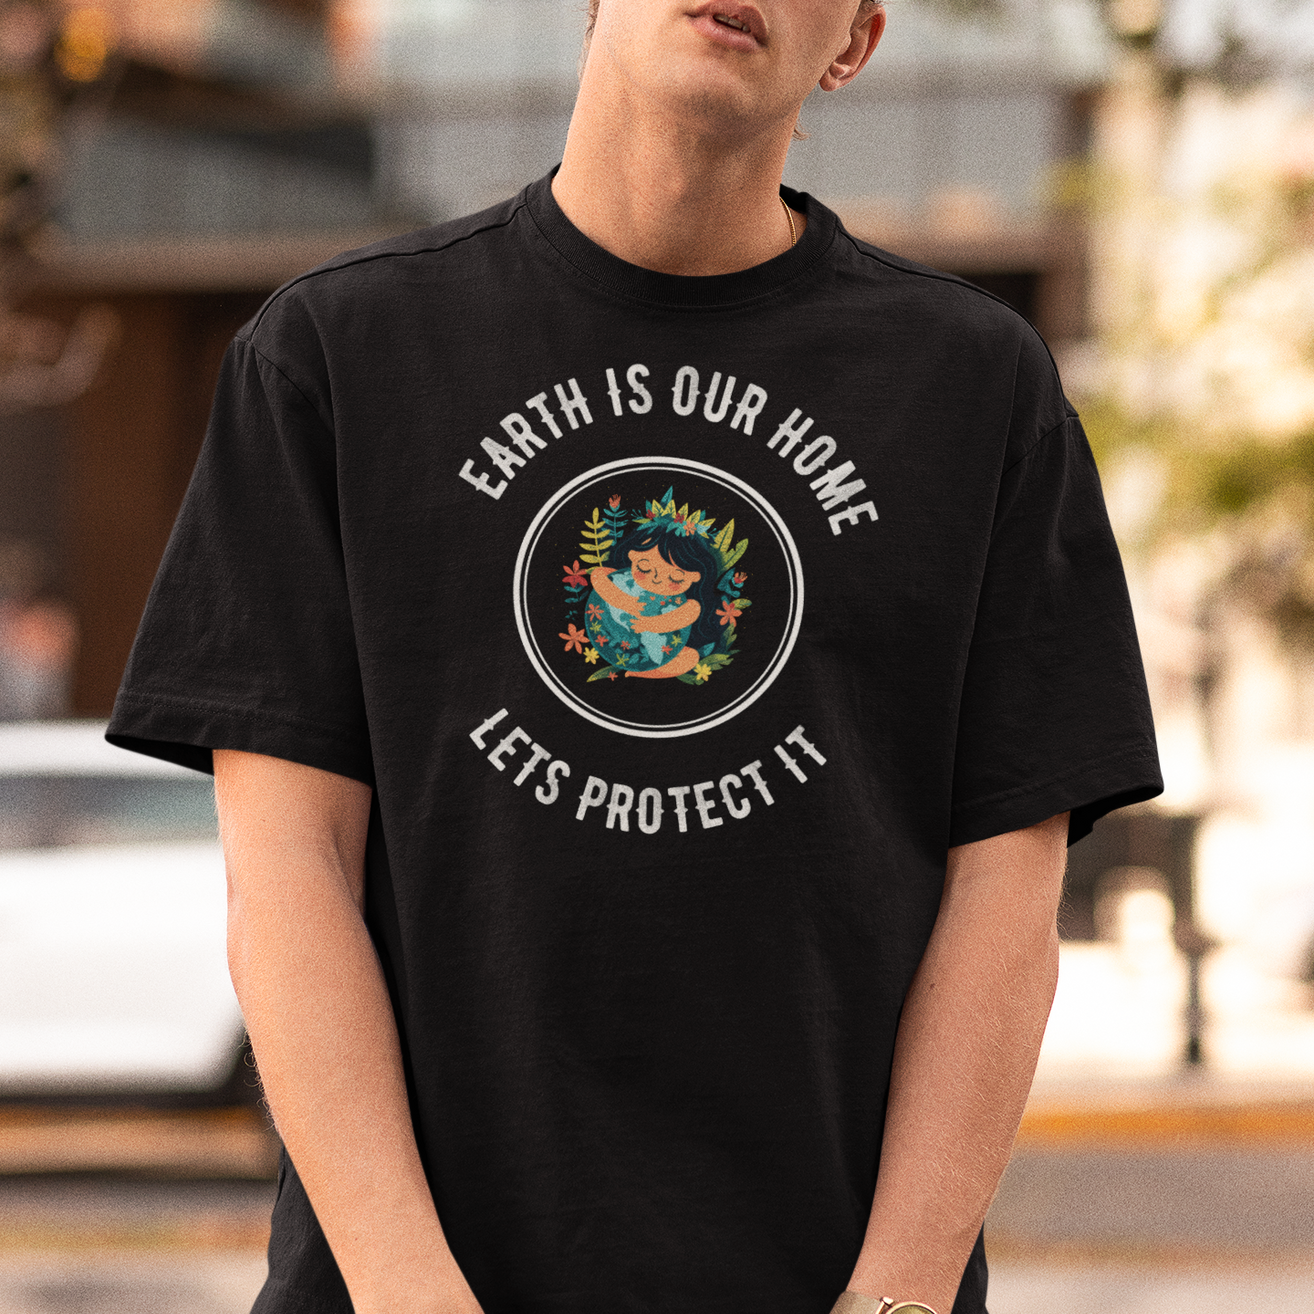 Men's Oversized T-Shirt - "Earth Is Our Home: Let's Protect It" Environment Day Theme T-Shirt